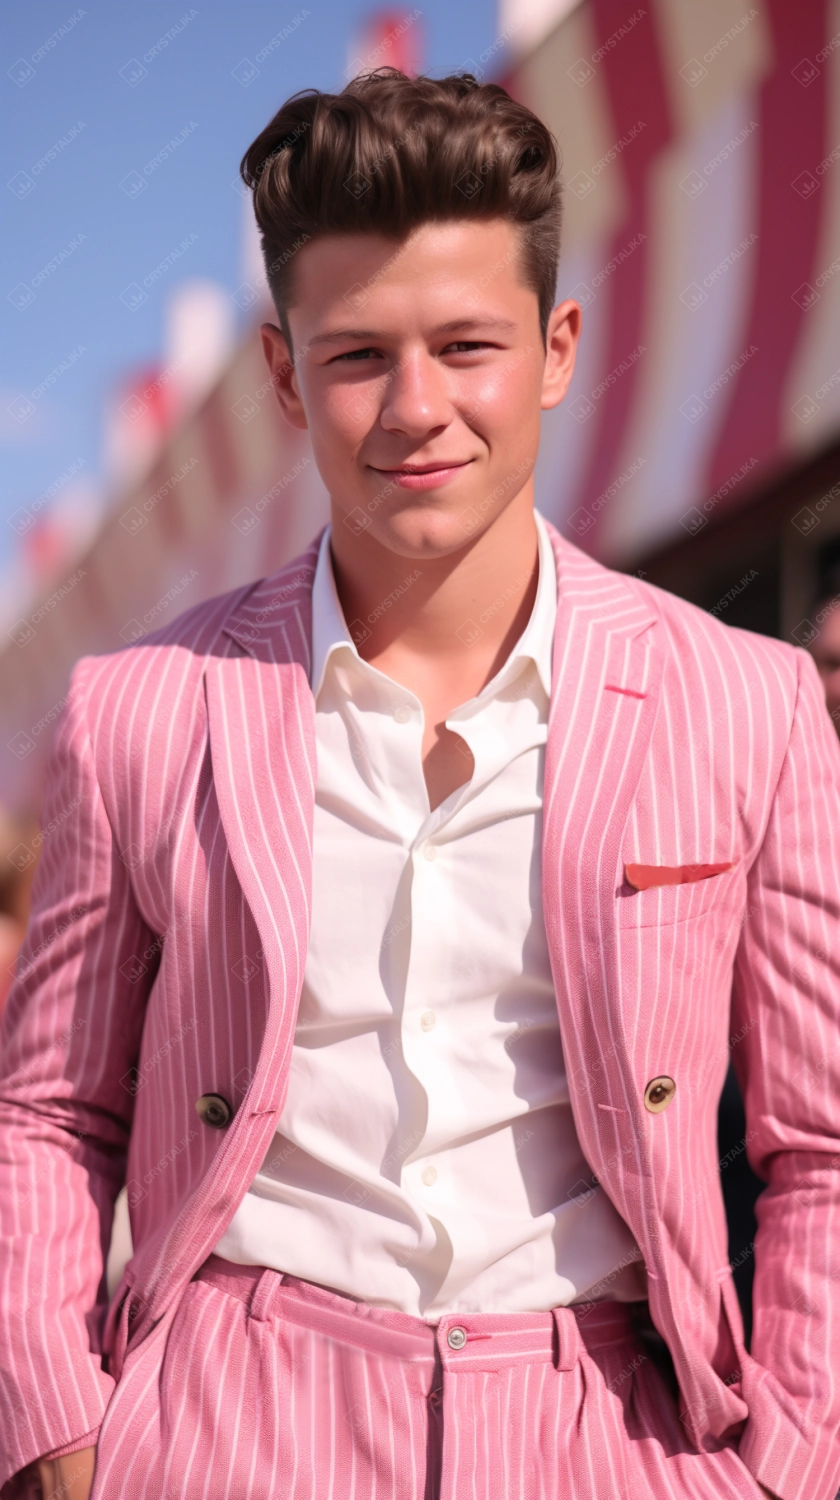 Portrait of a handsome young man in a pink suit on the street vintage style